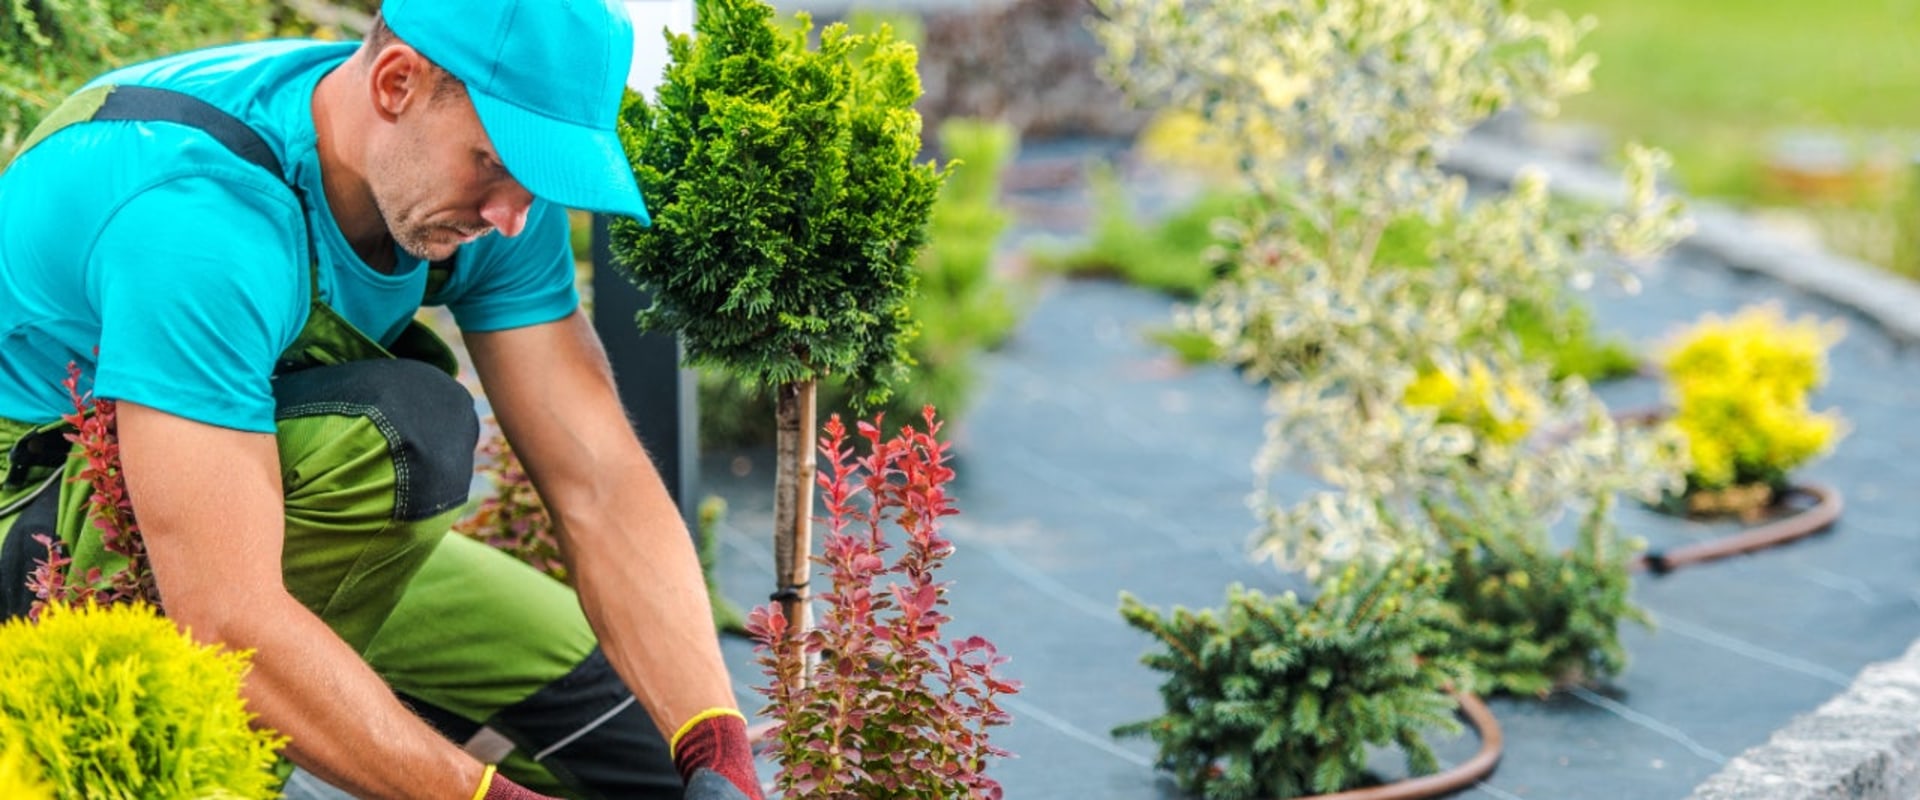 Categorizing Landscaping Expenses: A Guide for Landscapers